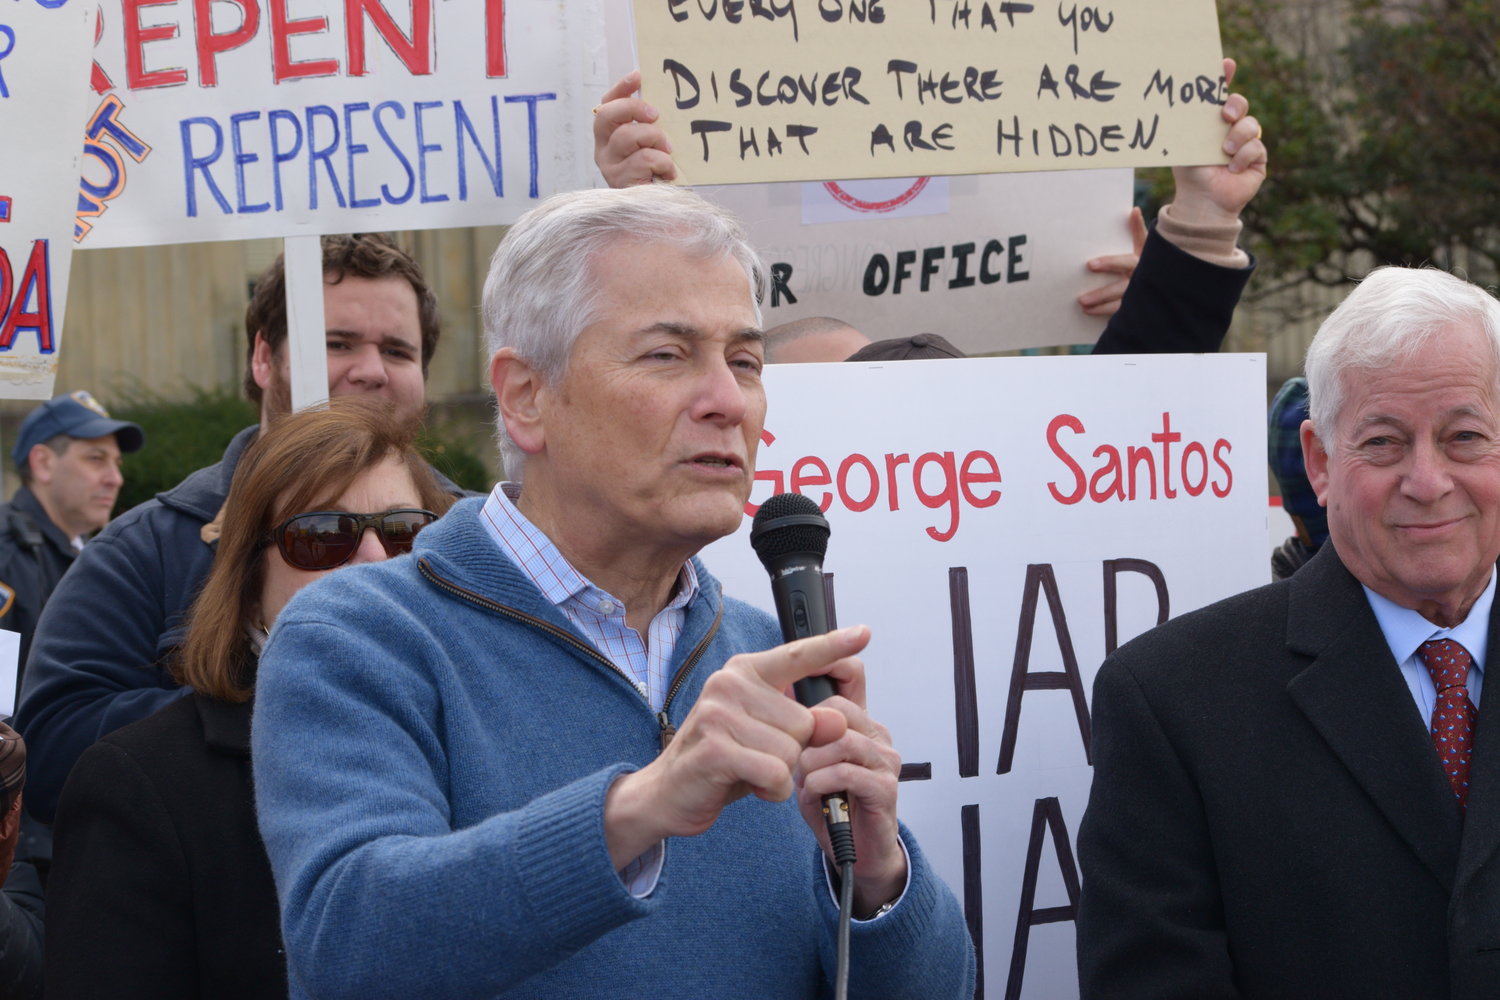 Robert Zimmerman, who lost to George Santos in their congressional race last month, joined other political leaders within his party in front of the Nassau County Courthouse in Mineola to condemn Santos and what they described as his lies into his background. They are calling for investigations into his background and finances, questioning how his income jumped from $55.000 annually to more than $1.75 million over the course of two years.